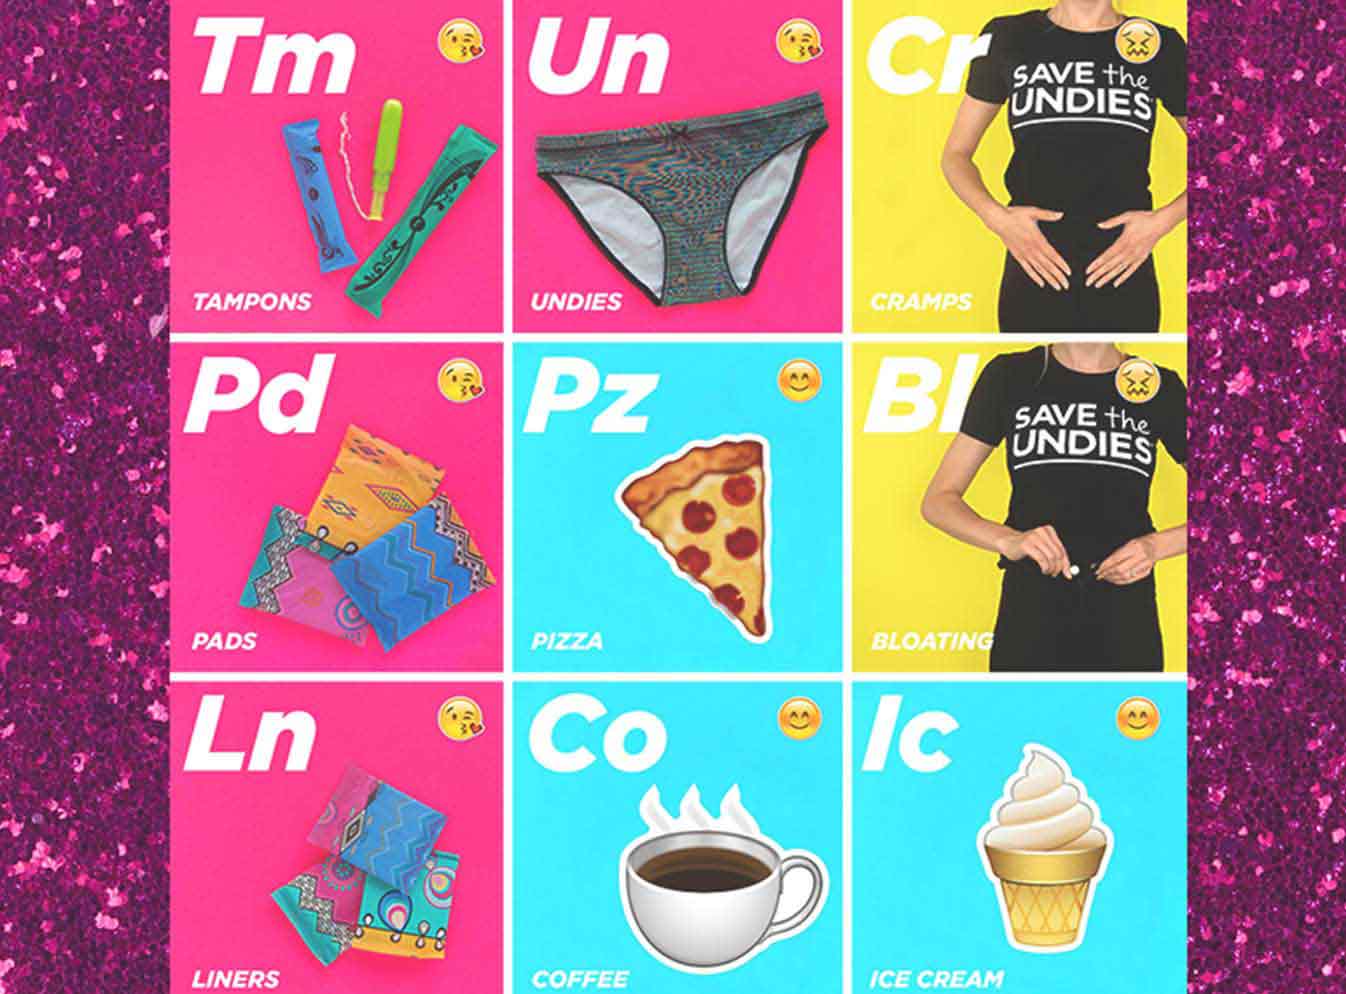 Tampons, pads, liners, underwear, pizza, coffee, icecream icons